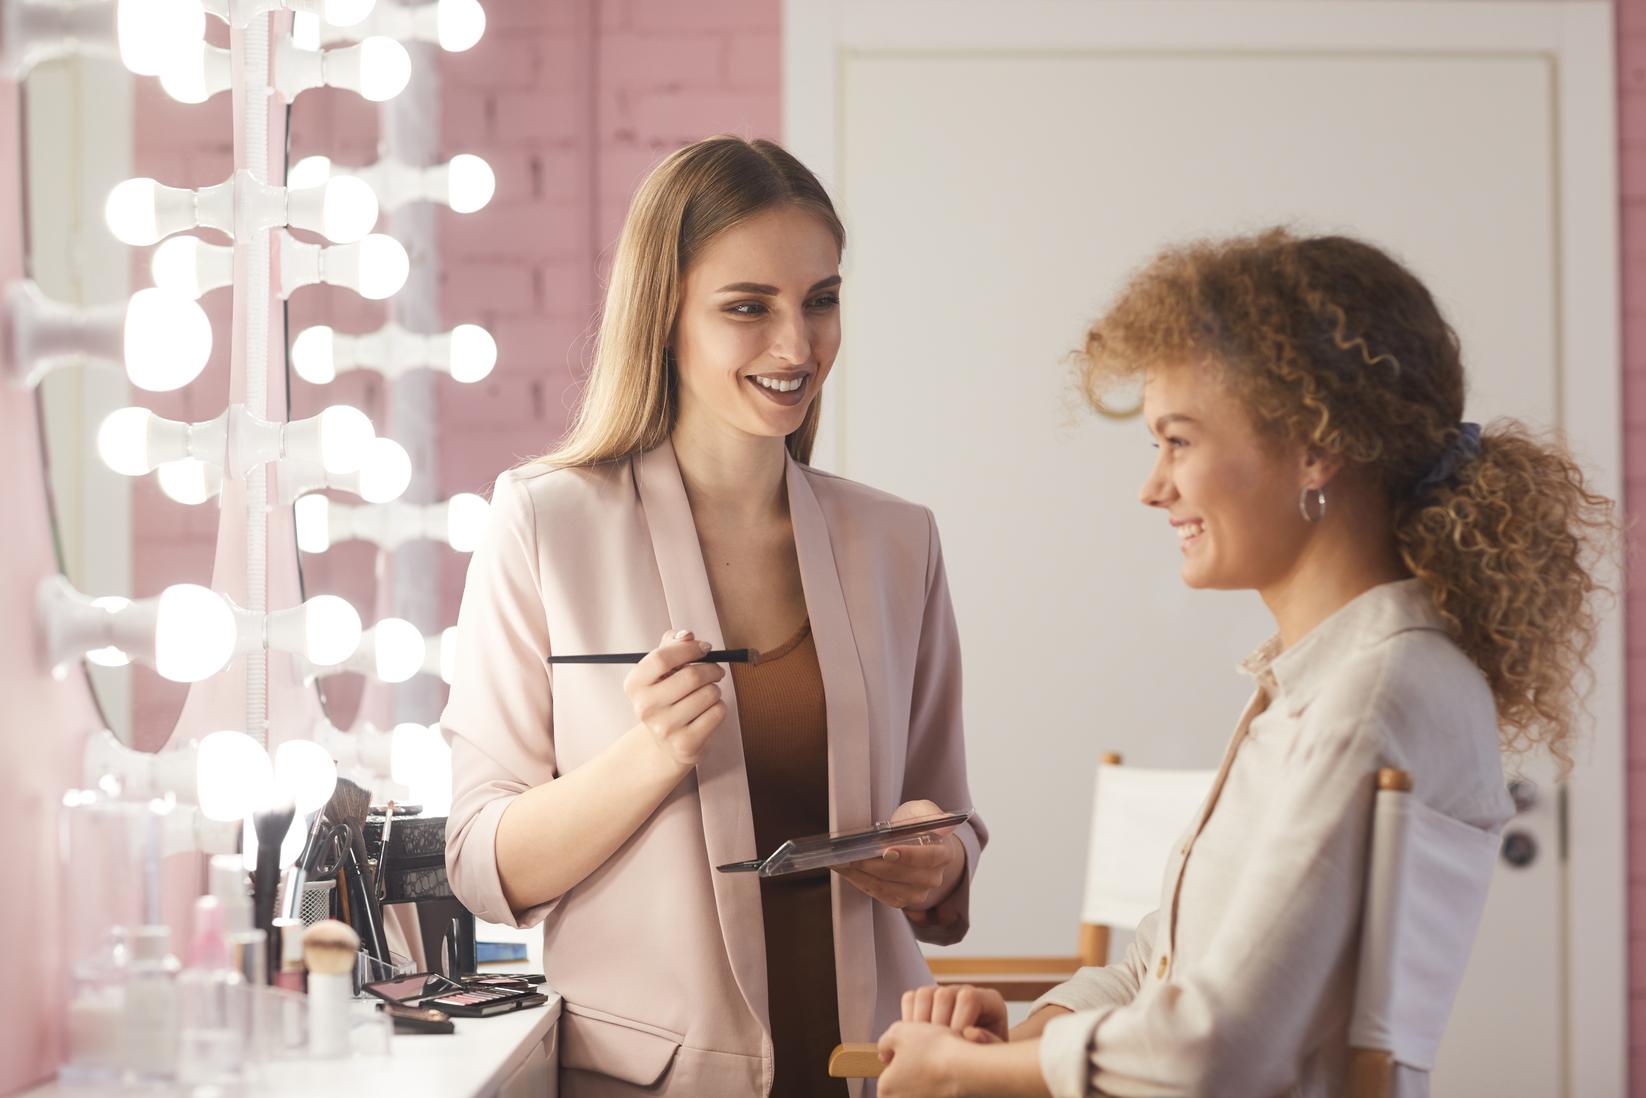 Easily manage appointments in your beauty salon